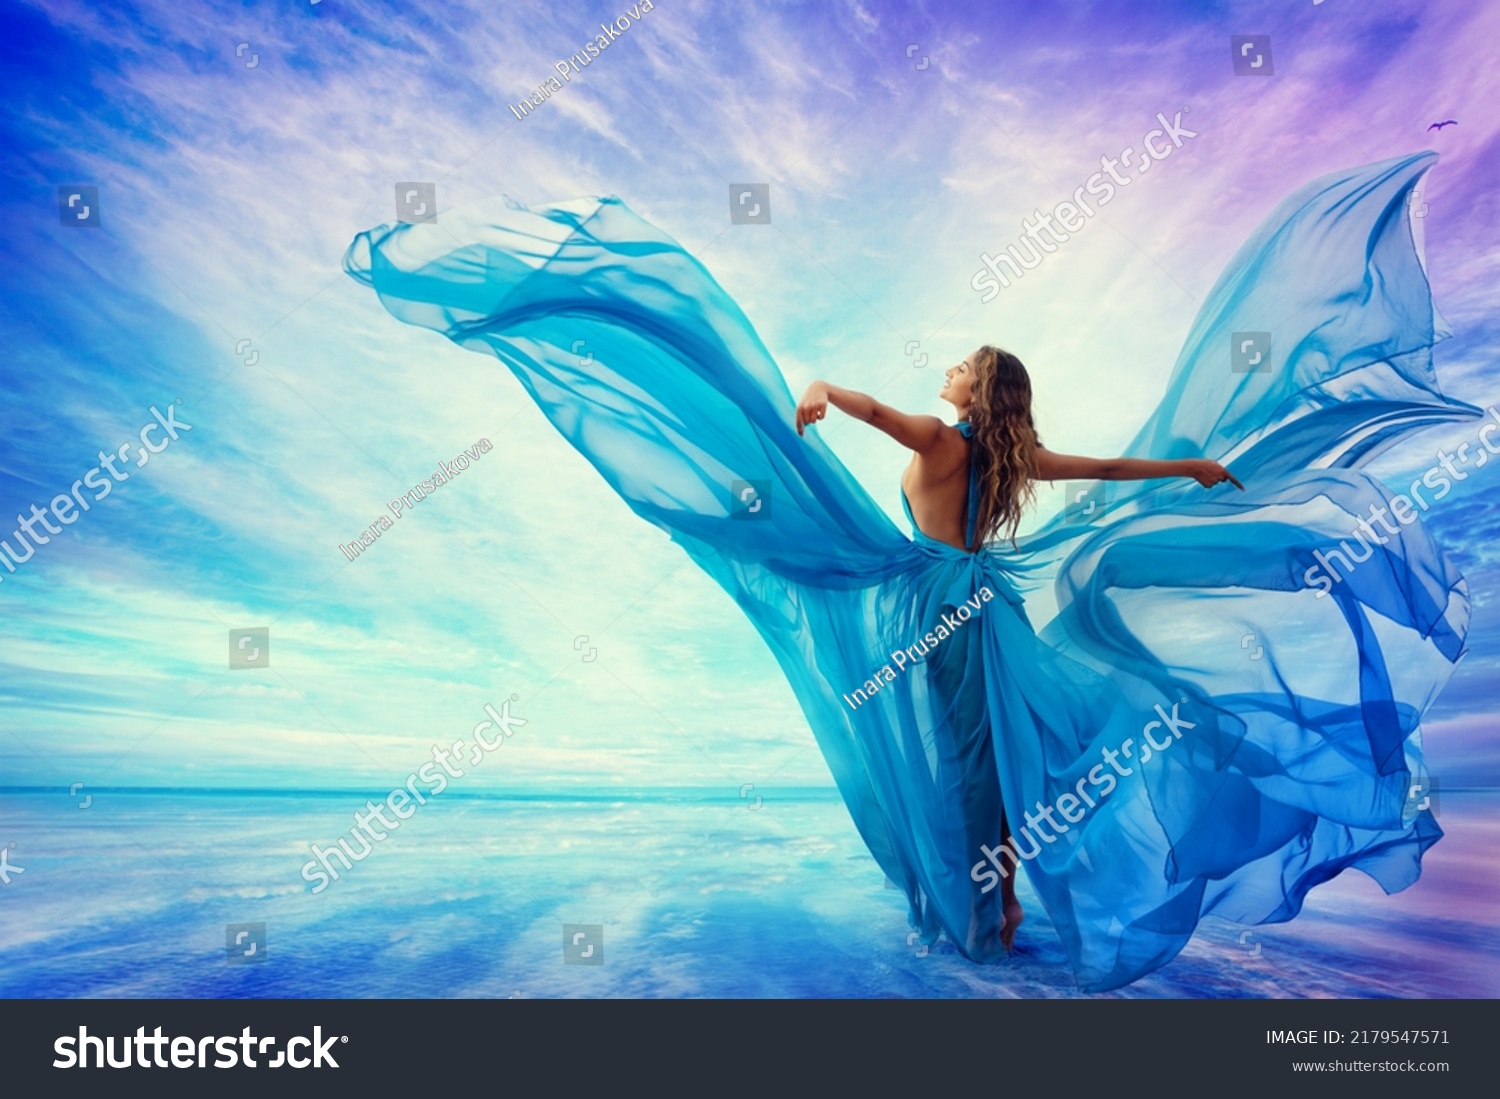 Woman in Blue Dress Flying on Wind looking at Sky and Sea. Beautiful Model Arms outstretched enjoying Freedom at Beach Summer Resort Rear view. Artistic Women Silhouette in Fantasy Gown as Butterfly #2179547571